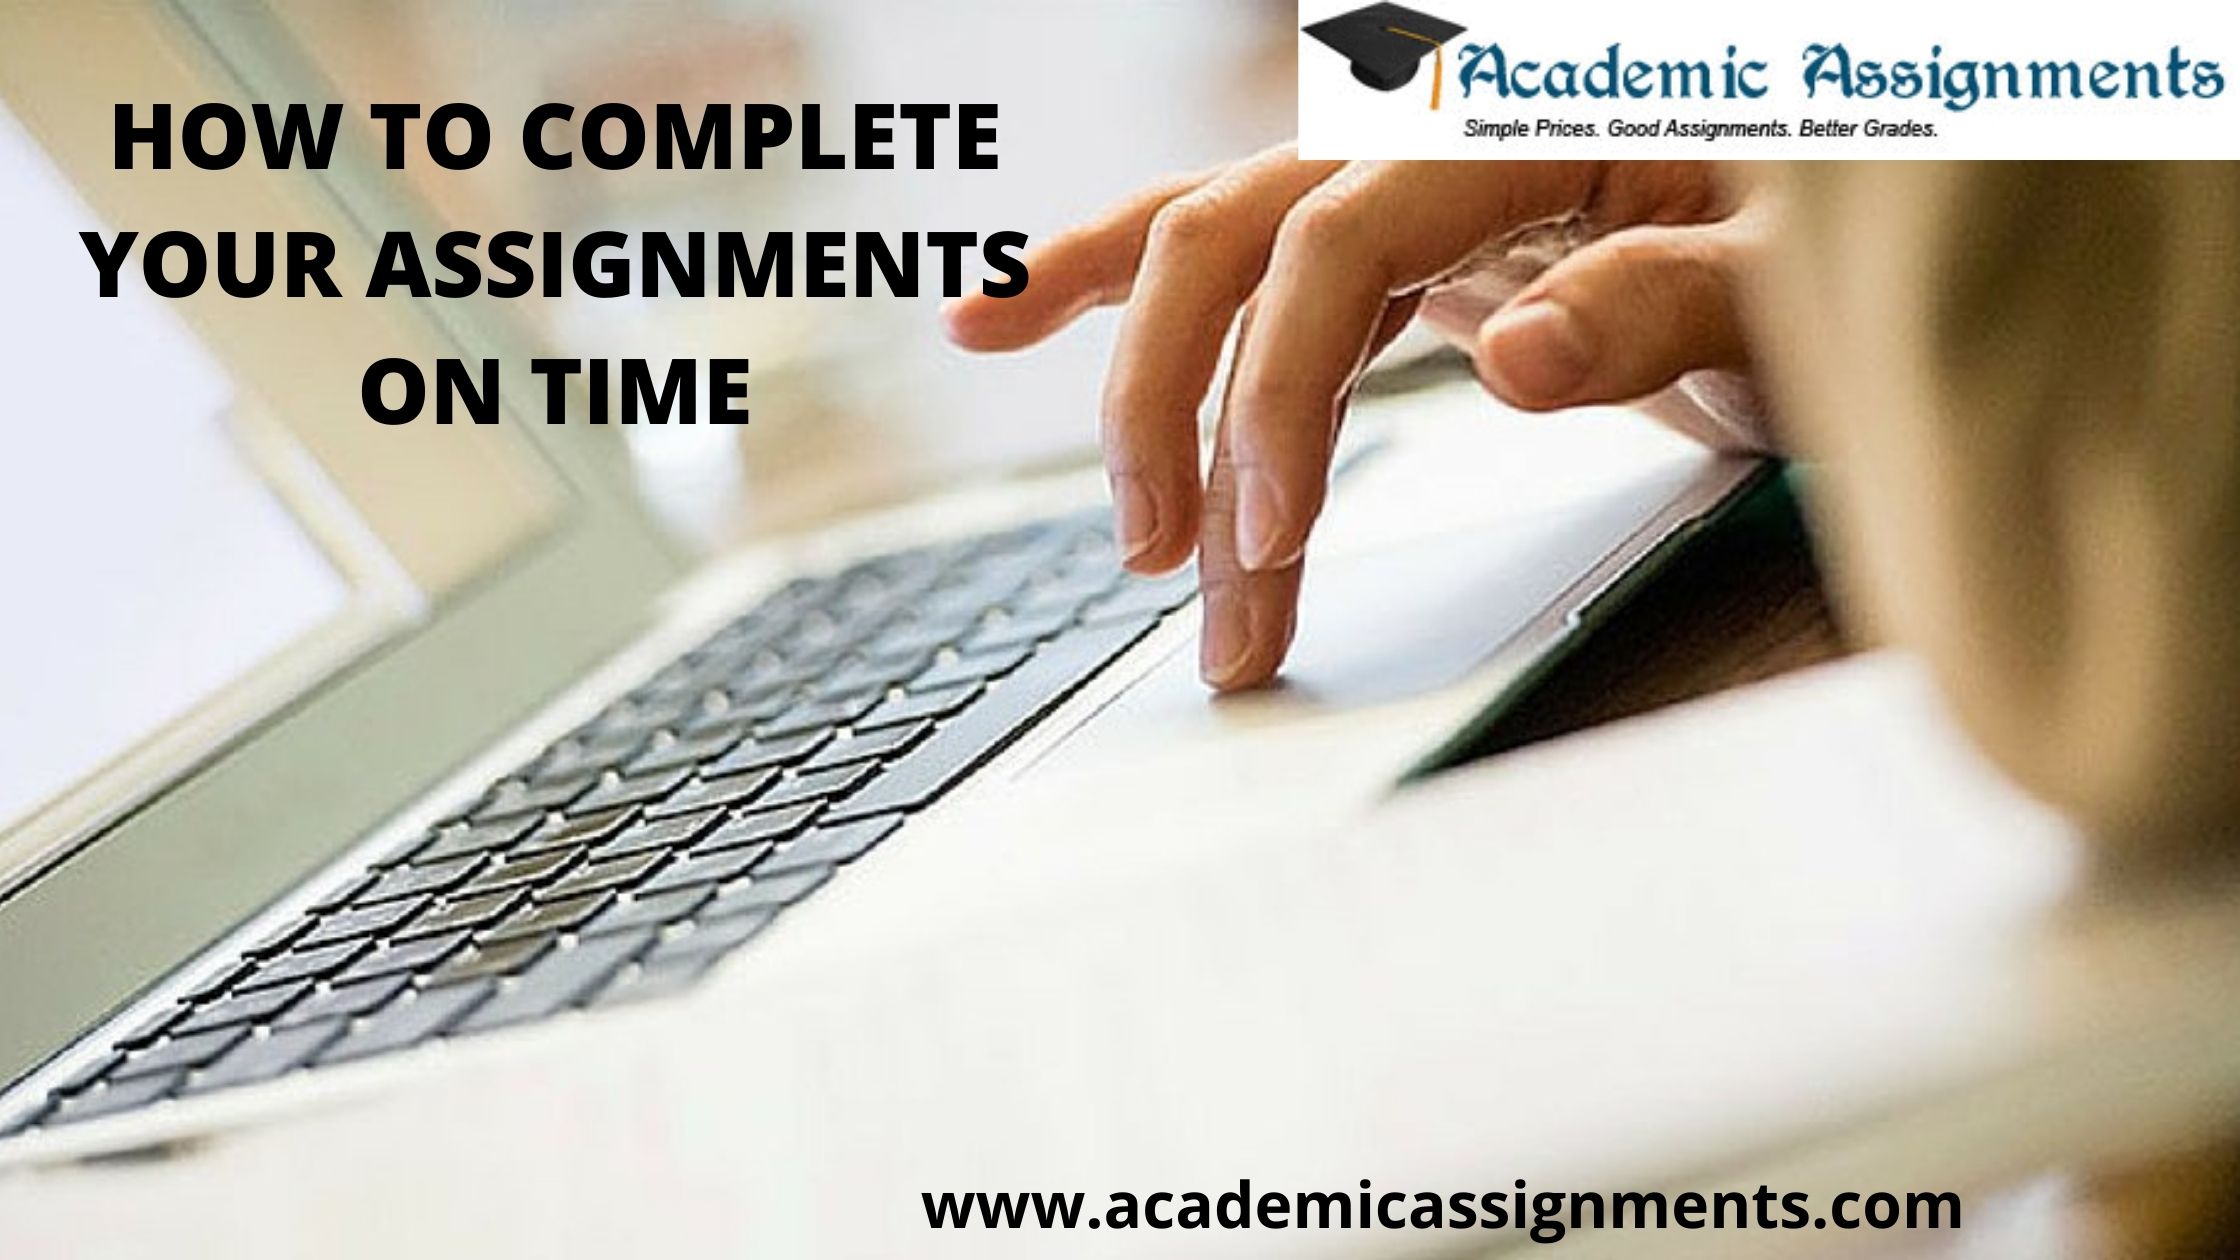 HOW TO COMPLETE YOUR ASSIGNMENTS ON TIME